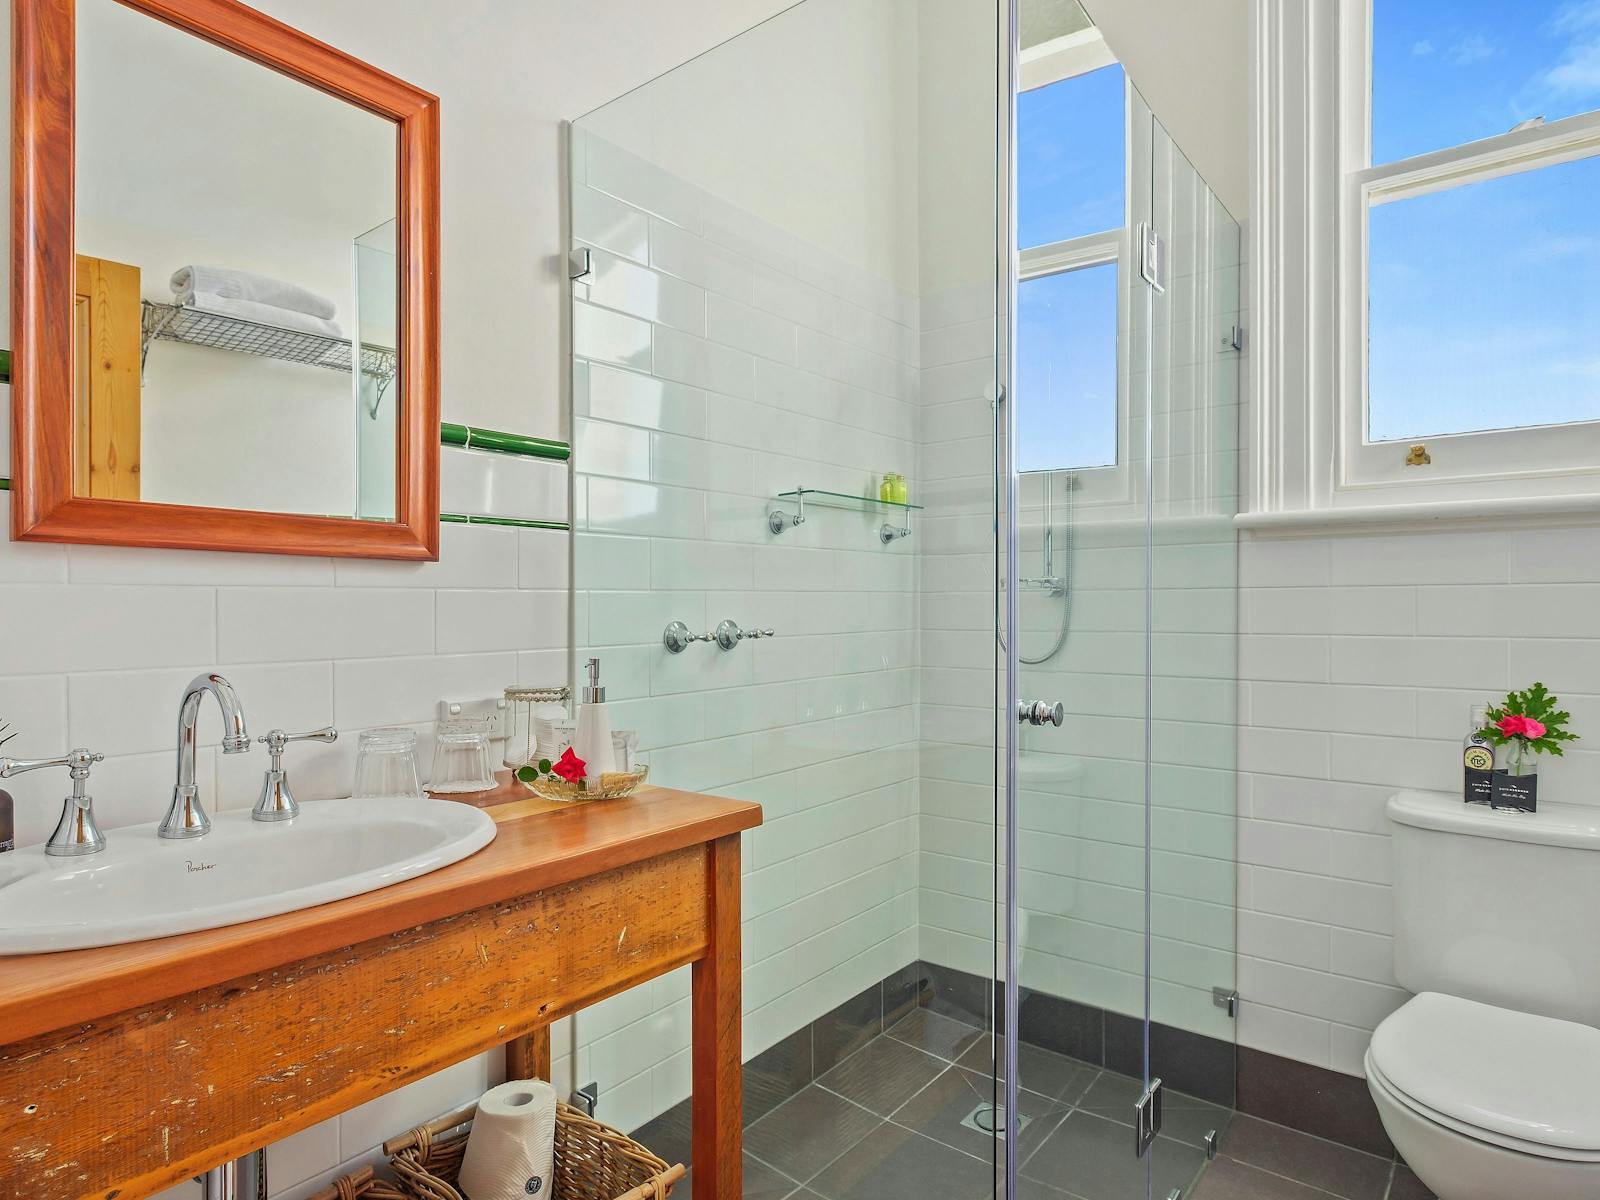 Cygnet Old Bank Franc Bathroom Huon Valley Accommodation Bed and Breakfast Ensuite Franc